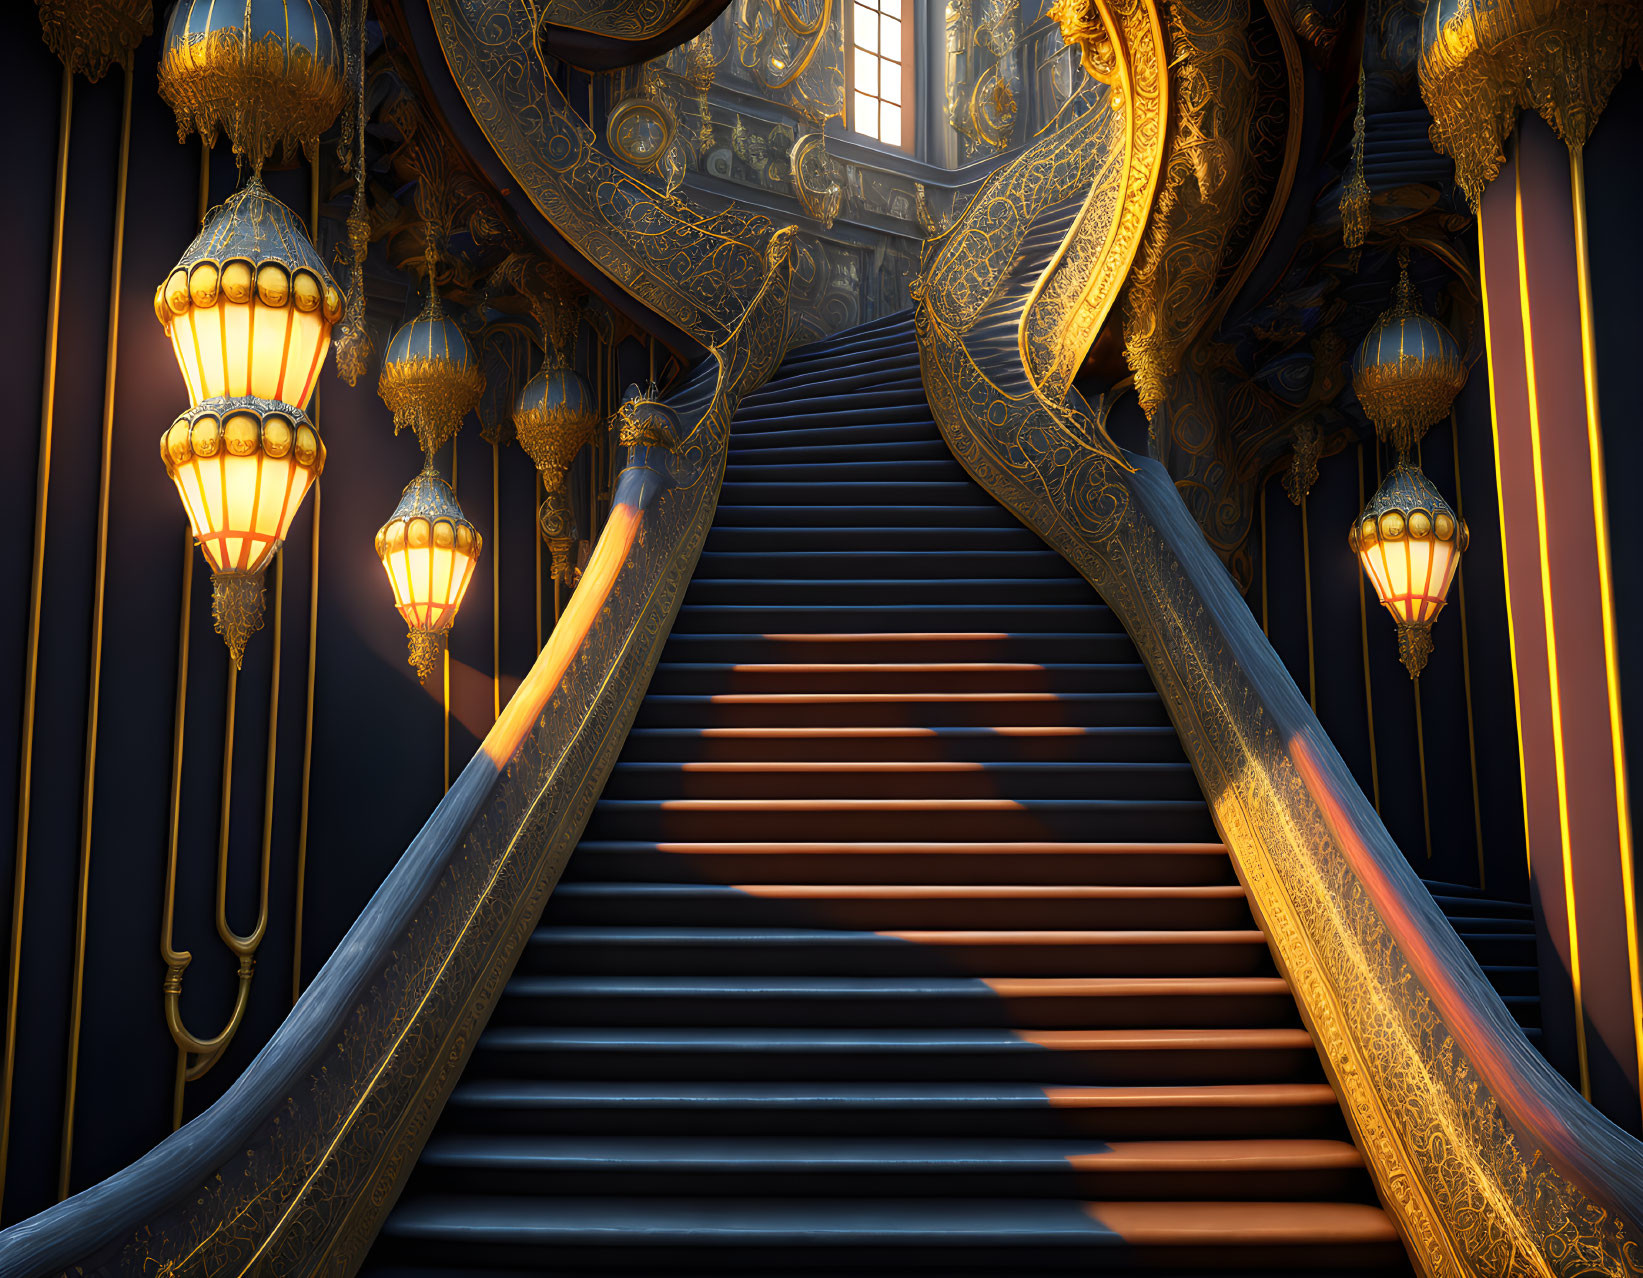 Luxurious ornate staircase with golden embellishments and warm glowing lamps against dark walls